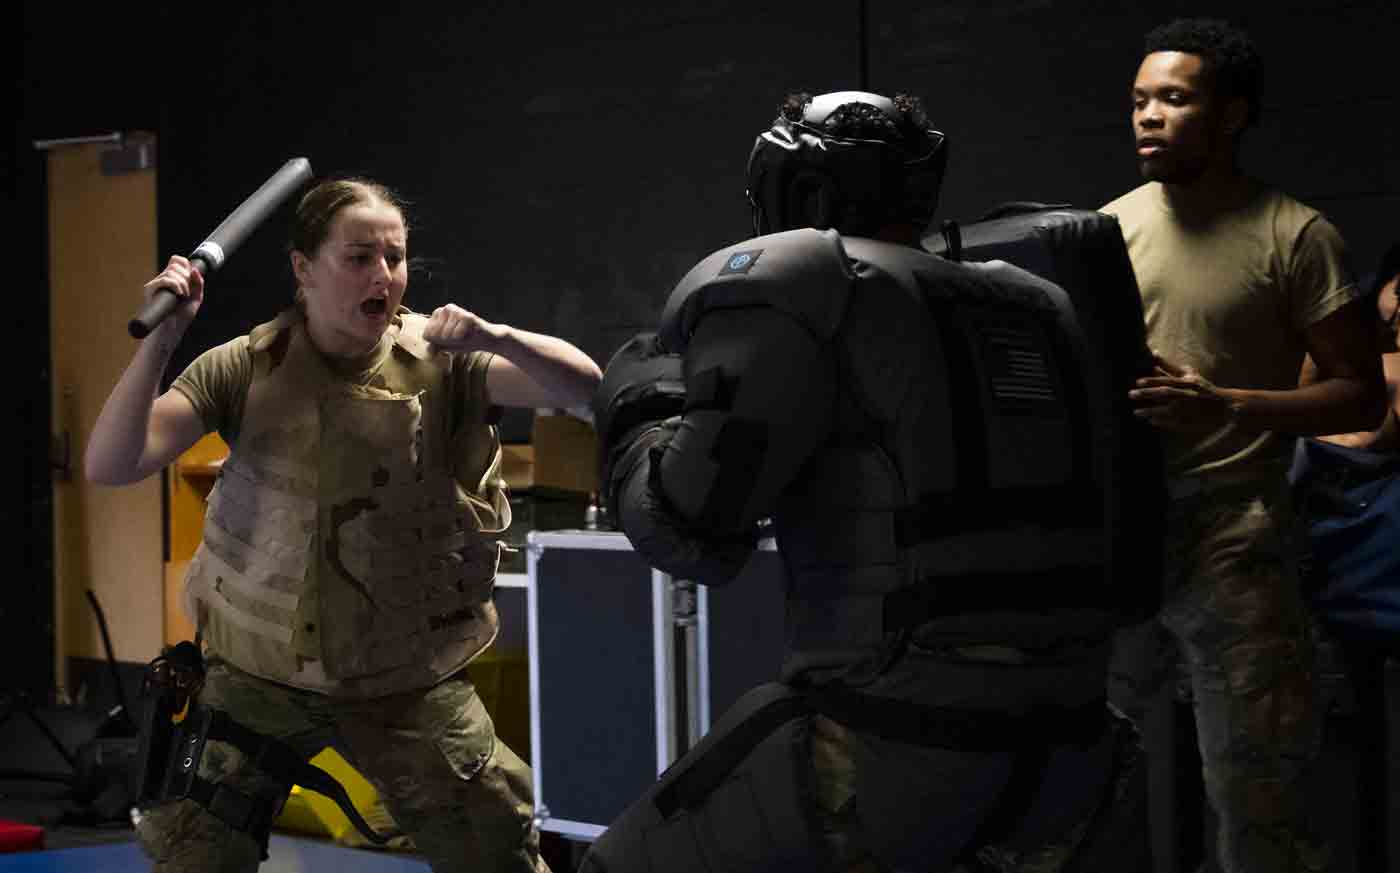 A female Airman attacks a simulated attacker during a baton training session.